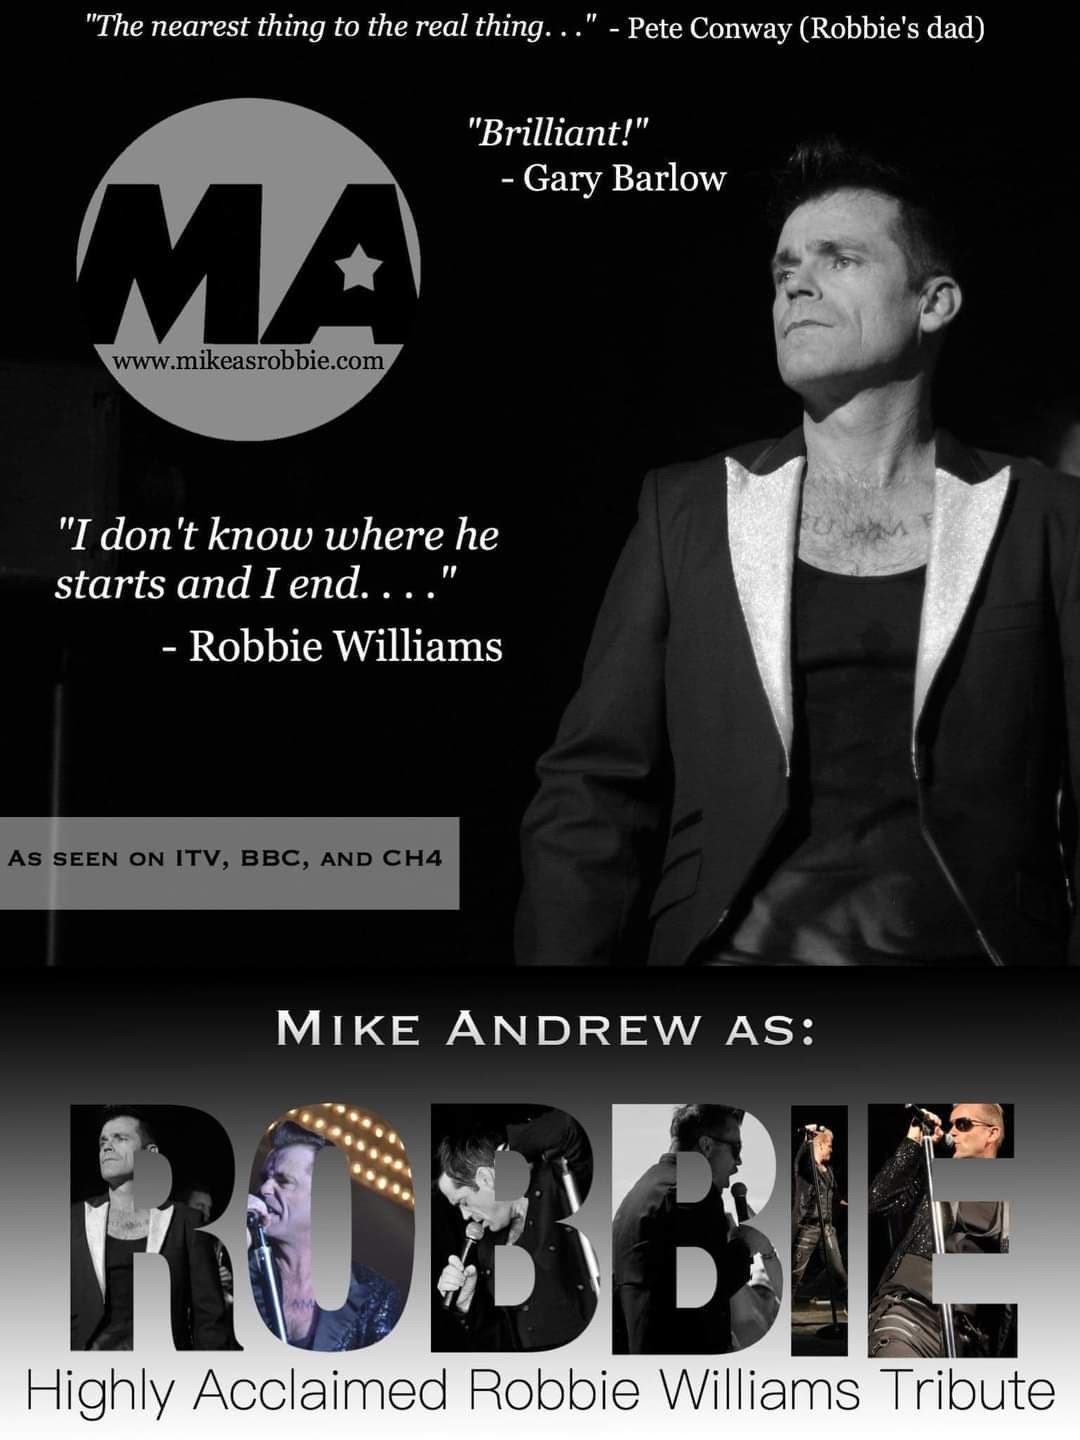 ROBBIE WILLIAMS TRIBUTE NIGHT  on Nov 05, 19:30@Wisbech working mens con club - Buy tickets and Get information on whittlesey music nights 